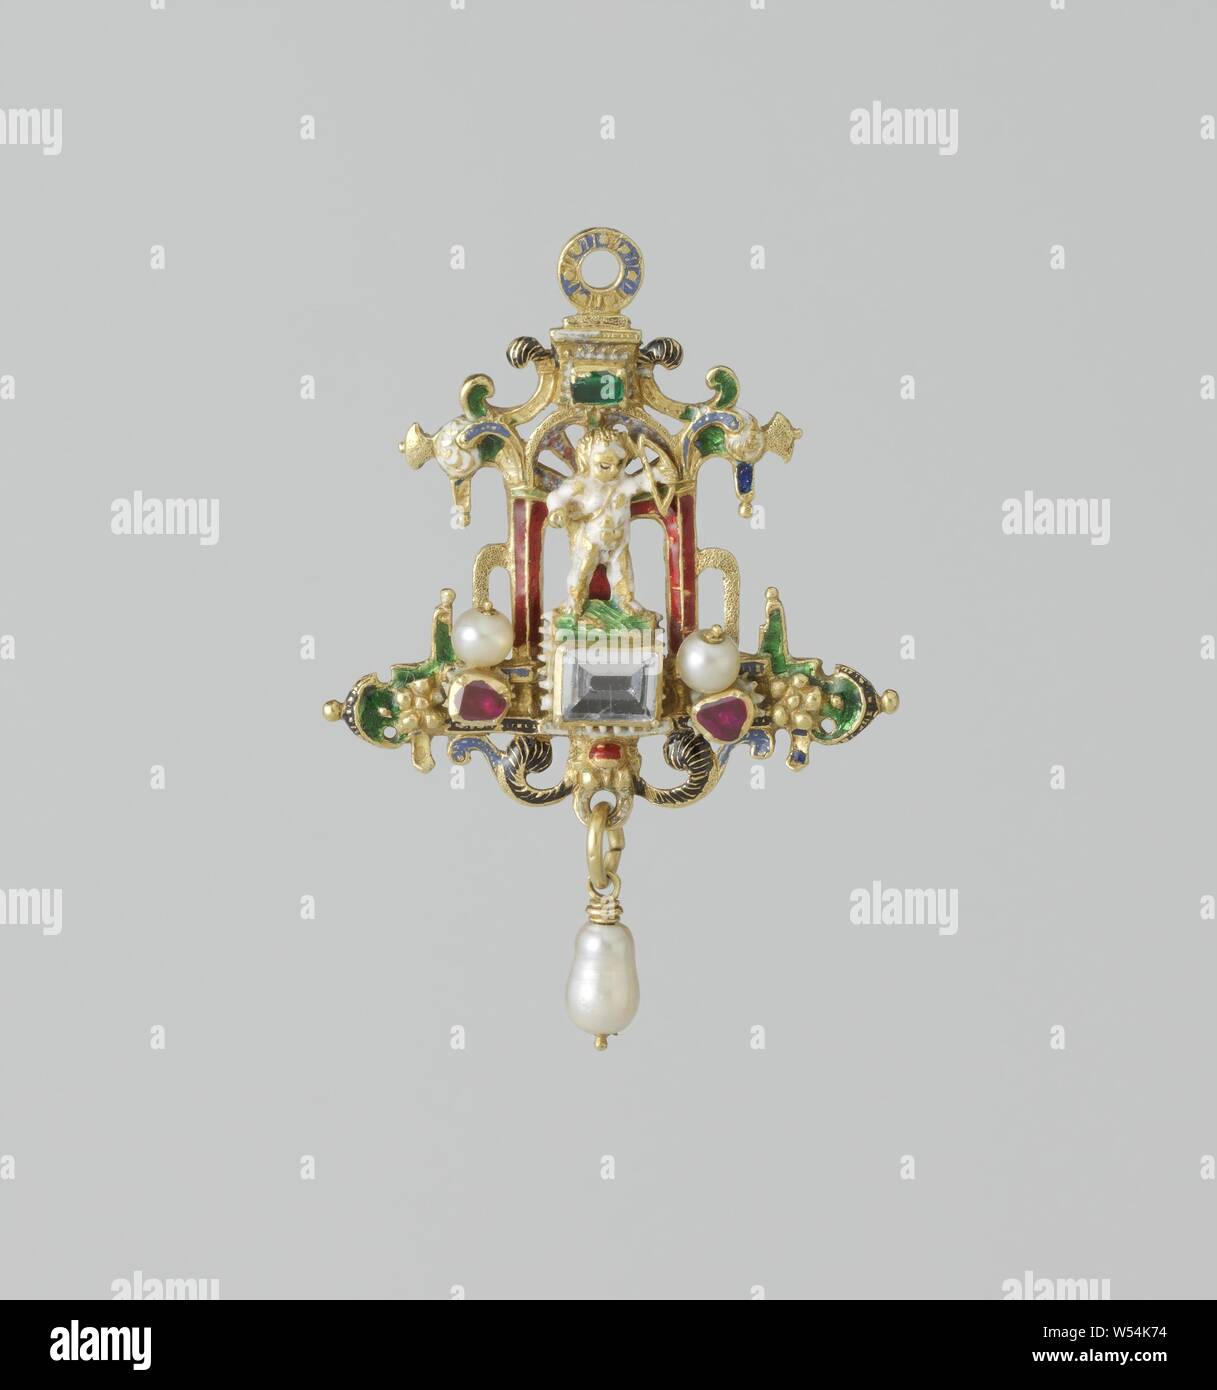 Pendant in the form of Cupid in a niche, Pendant with Amor in a niche, Pendant of gold, enamel and precious stones. Representing an Amorphic figure, standing in a niche, surrounded by a Renaissance frame., anonymous, Germany, c. 1560 - c. 1580, gold (metal), pearl, h 5.5 cm × w 3.9 cm Stock Photo